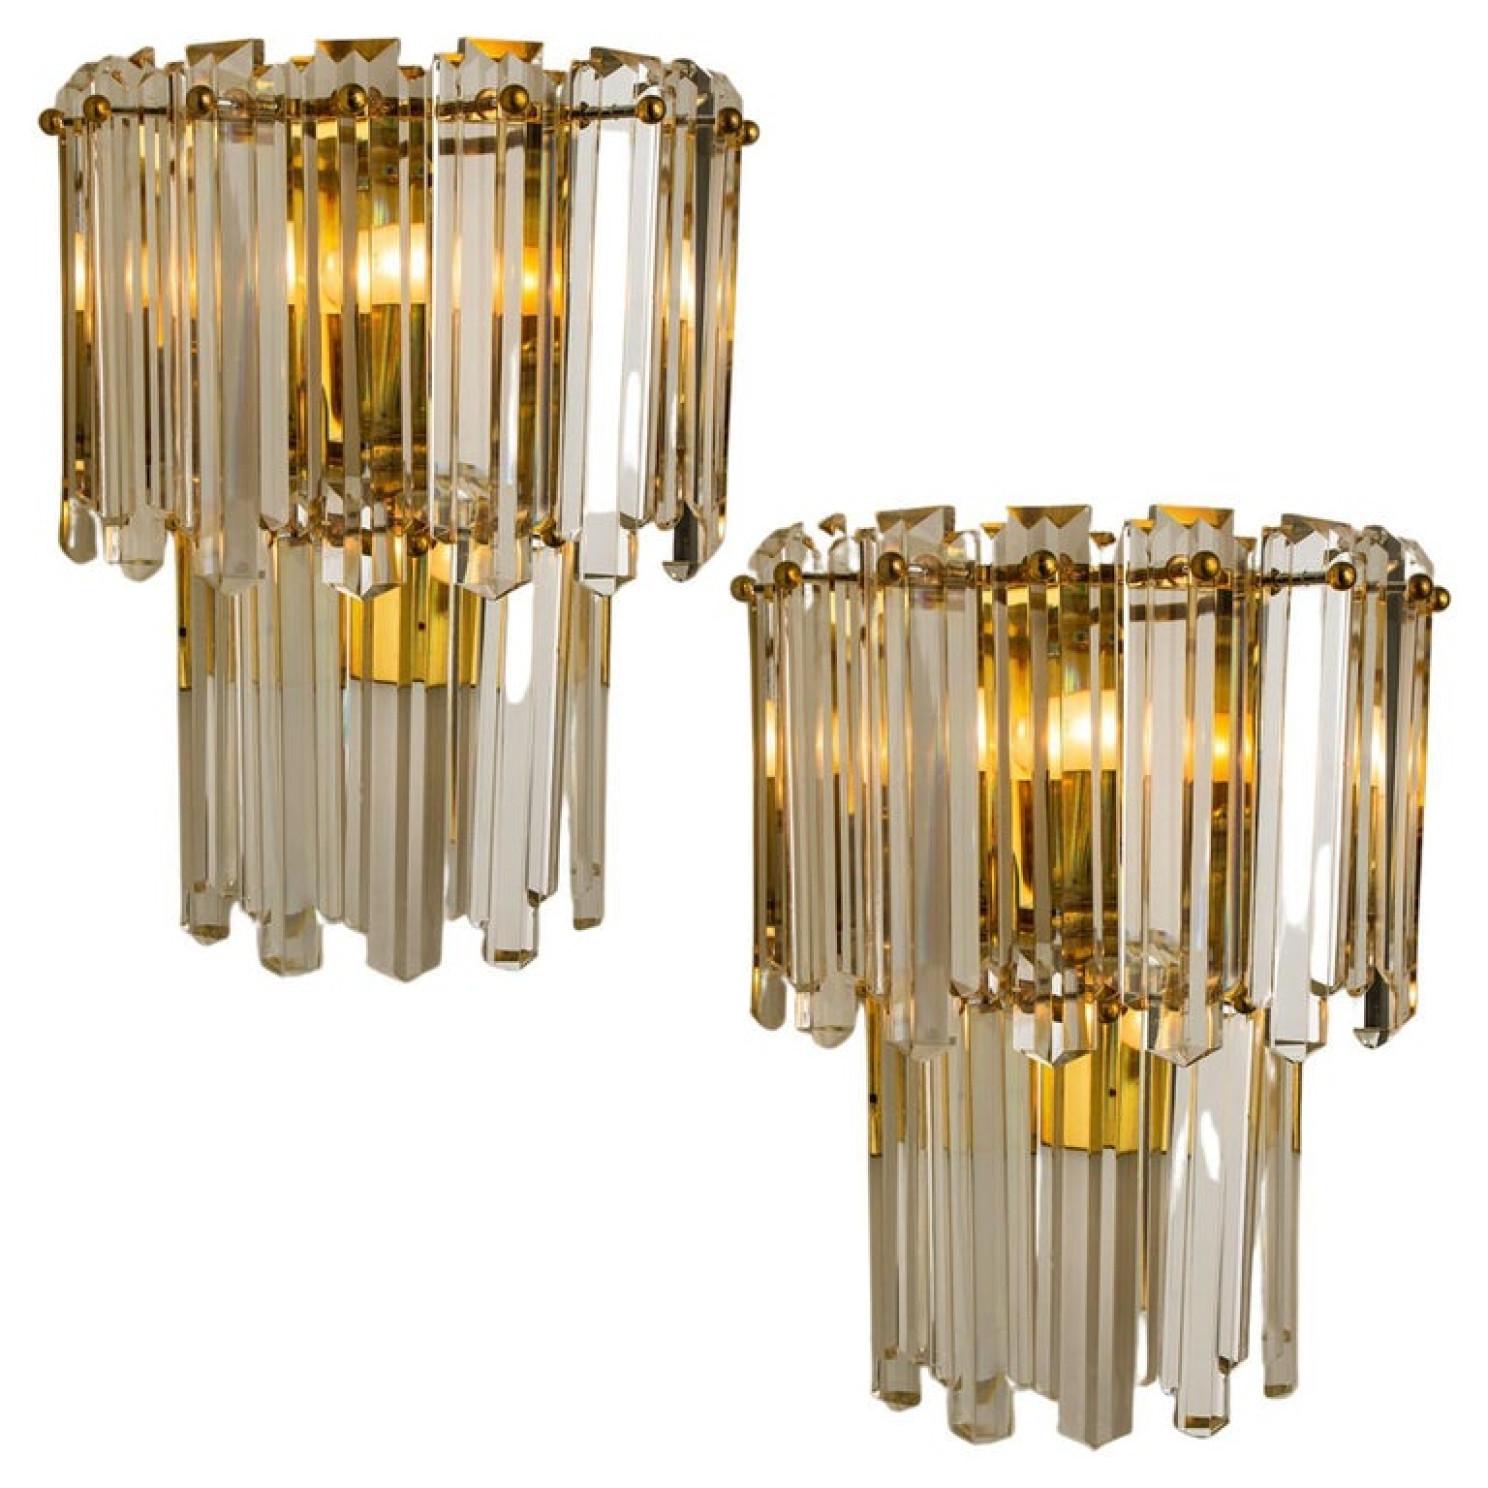 Pair of High-end wall sconces each wall sconce is featuring wonderful faceted crystal clear glass 